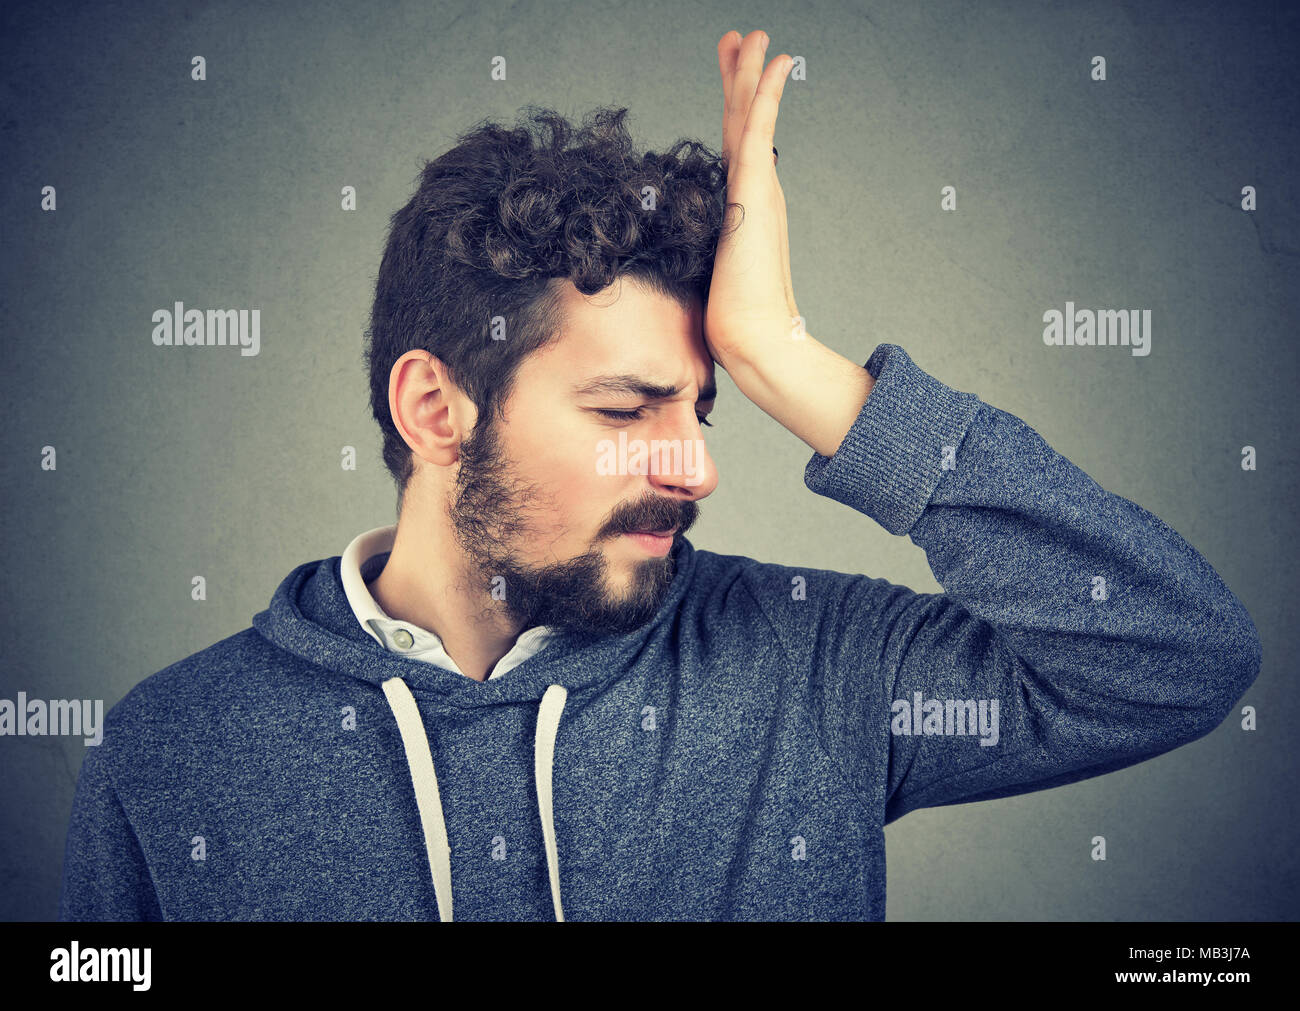 Regrets wrong doing. Portrait silly young man, slapping hand on head having a duh moment isolated on gray background. Negative emotion expression feel Stock Photo